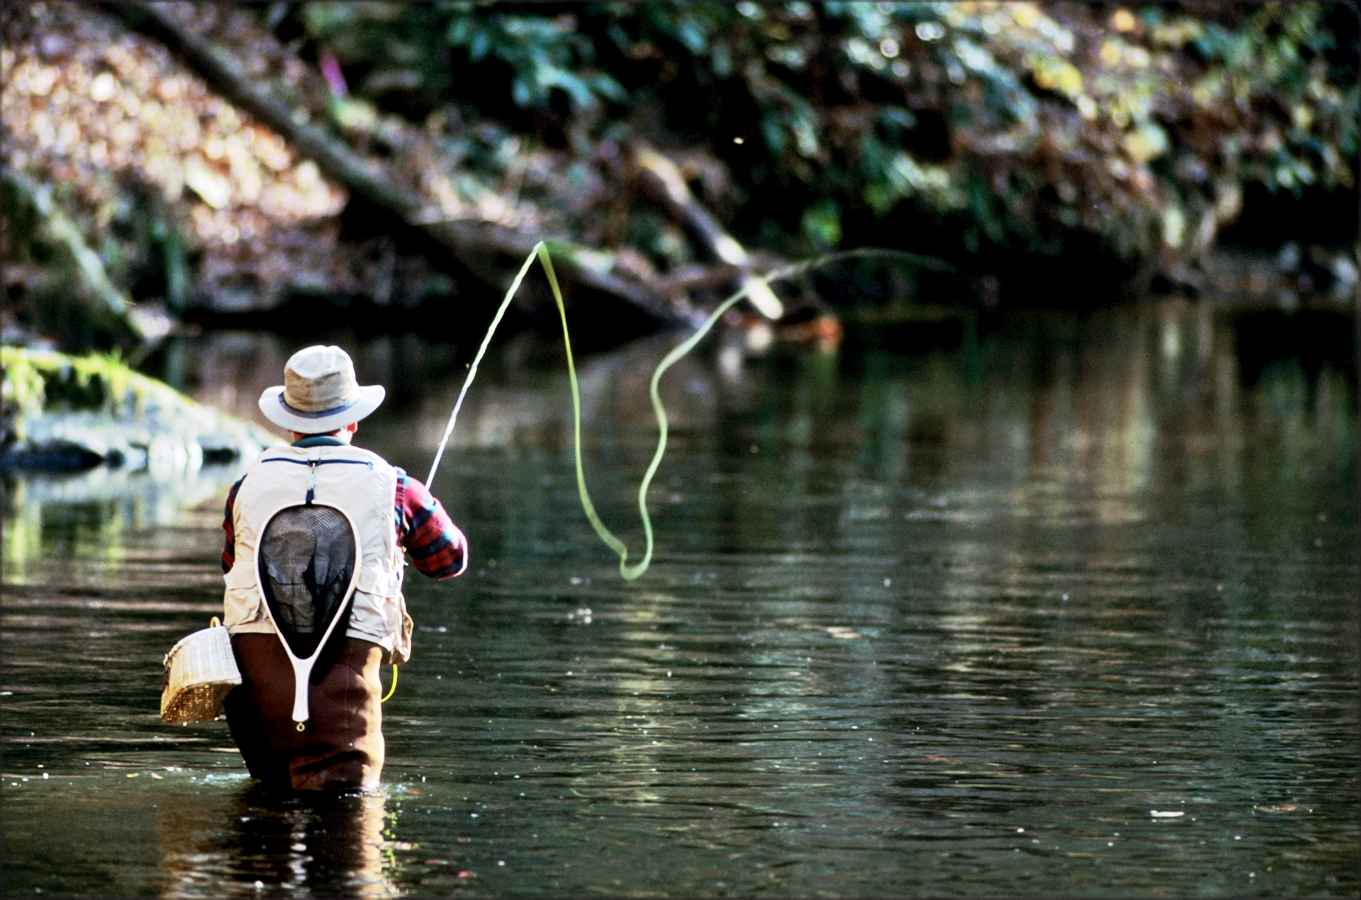 THE ART OF FLY FISHING - 1st Annual IF4 Stimmie Award Winning Short Film 